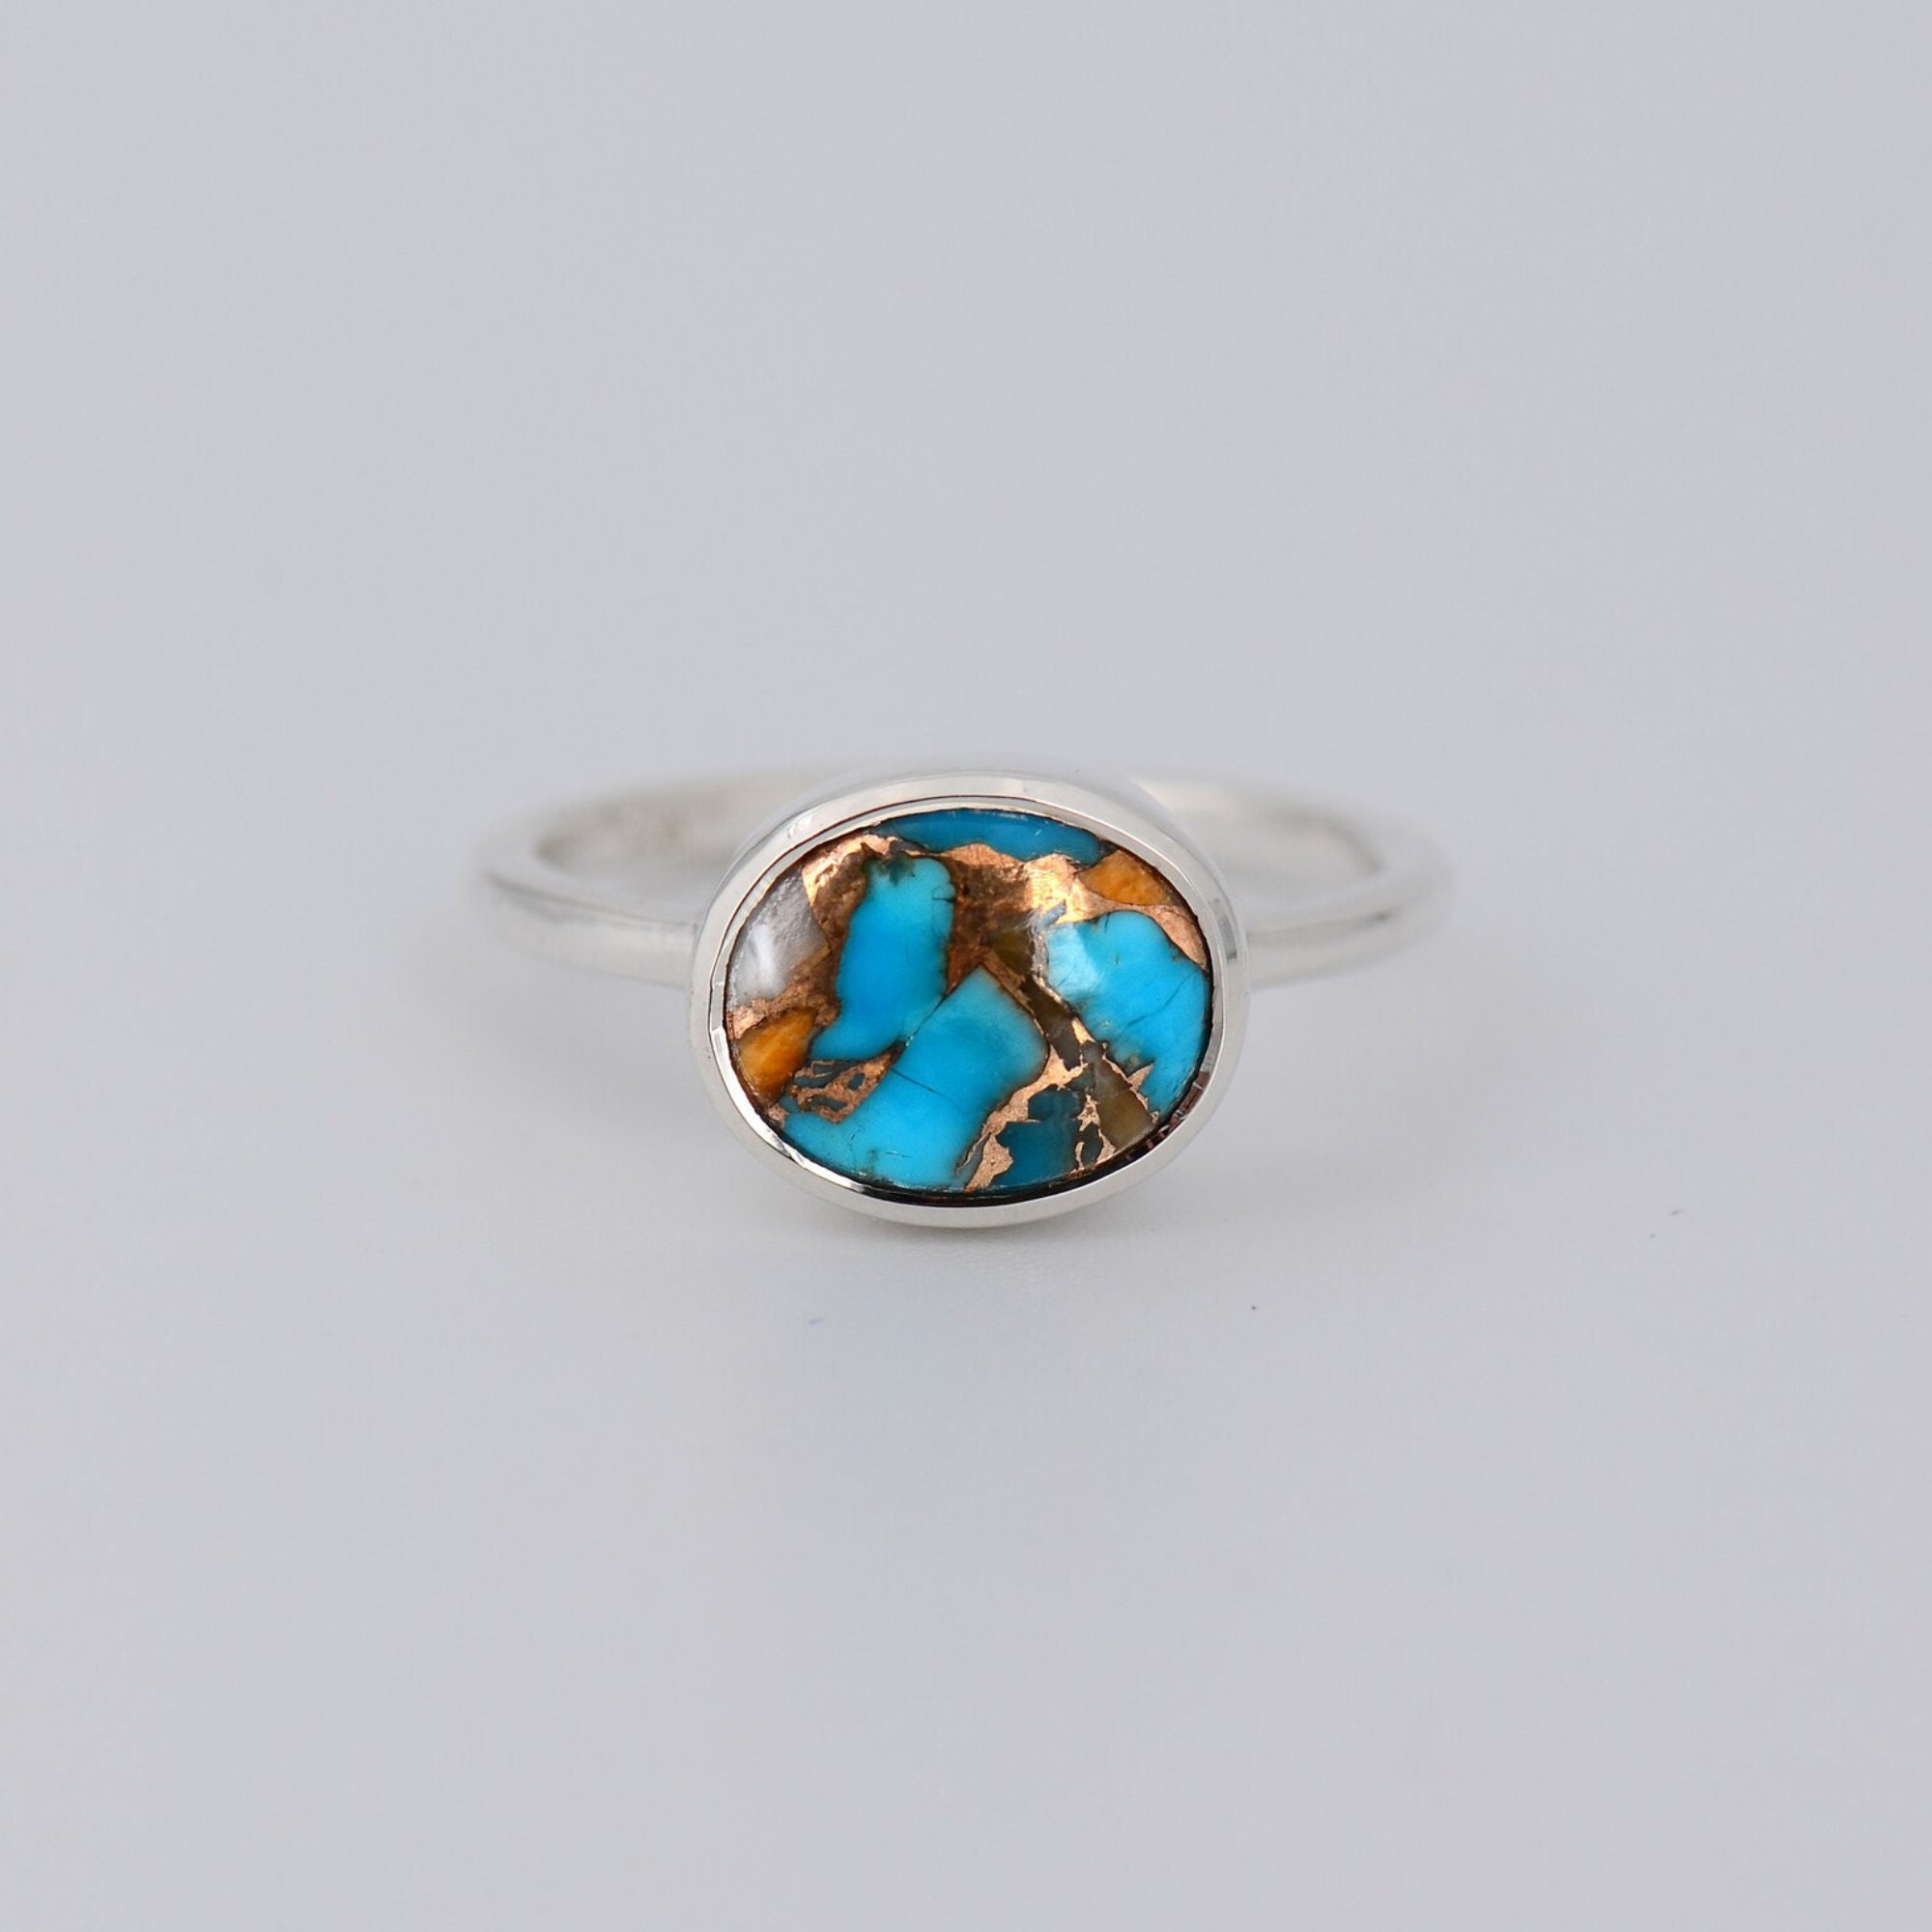 Copper Reflections Colorful Geometric Adjustable Rings for Women in Native American Design Ring Jewelry Turquoise 